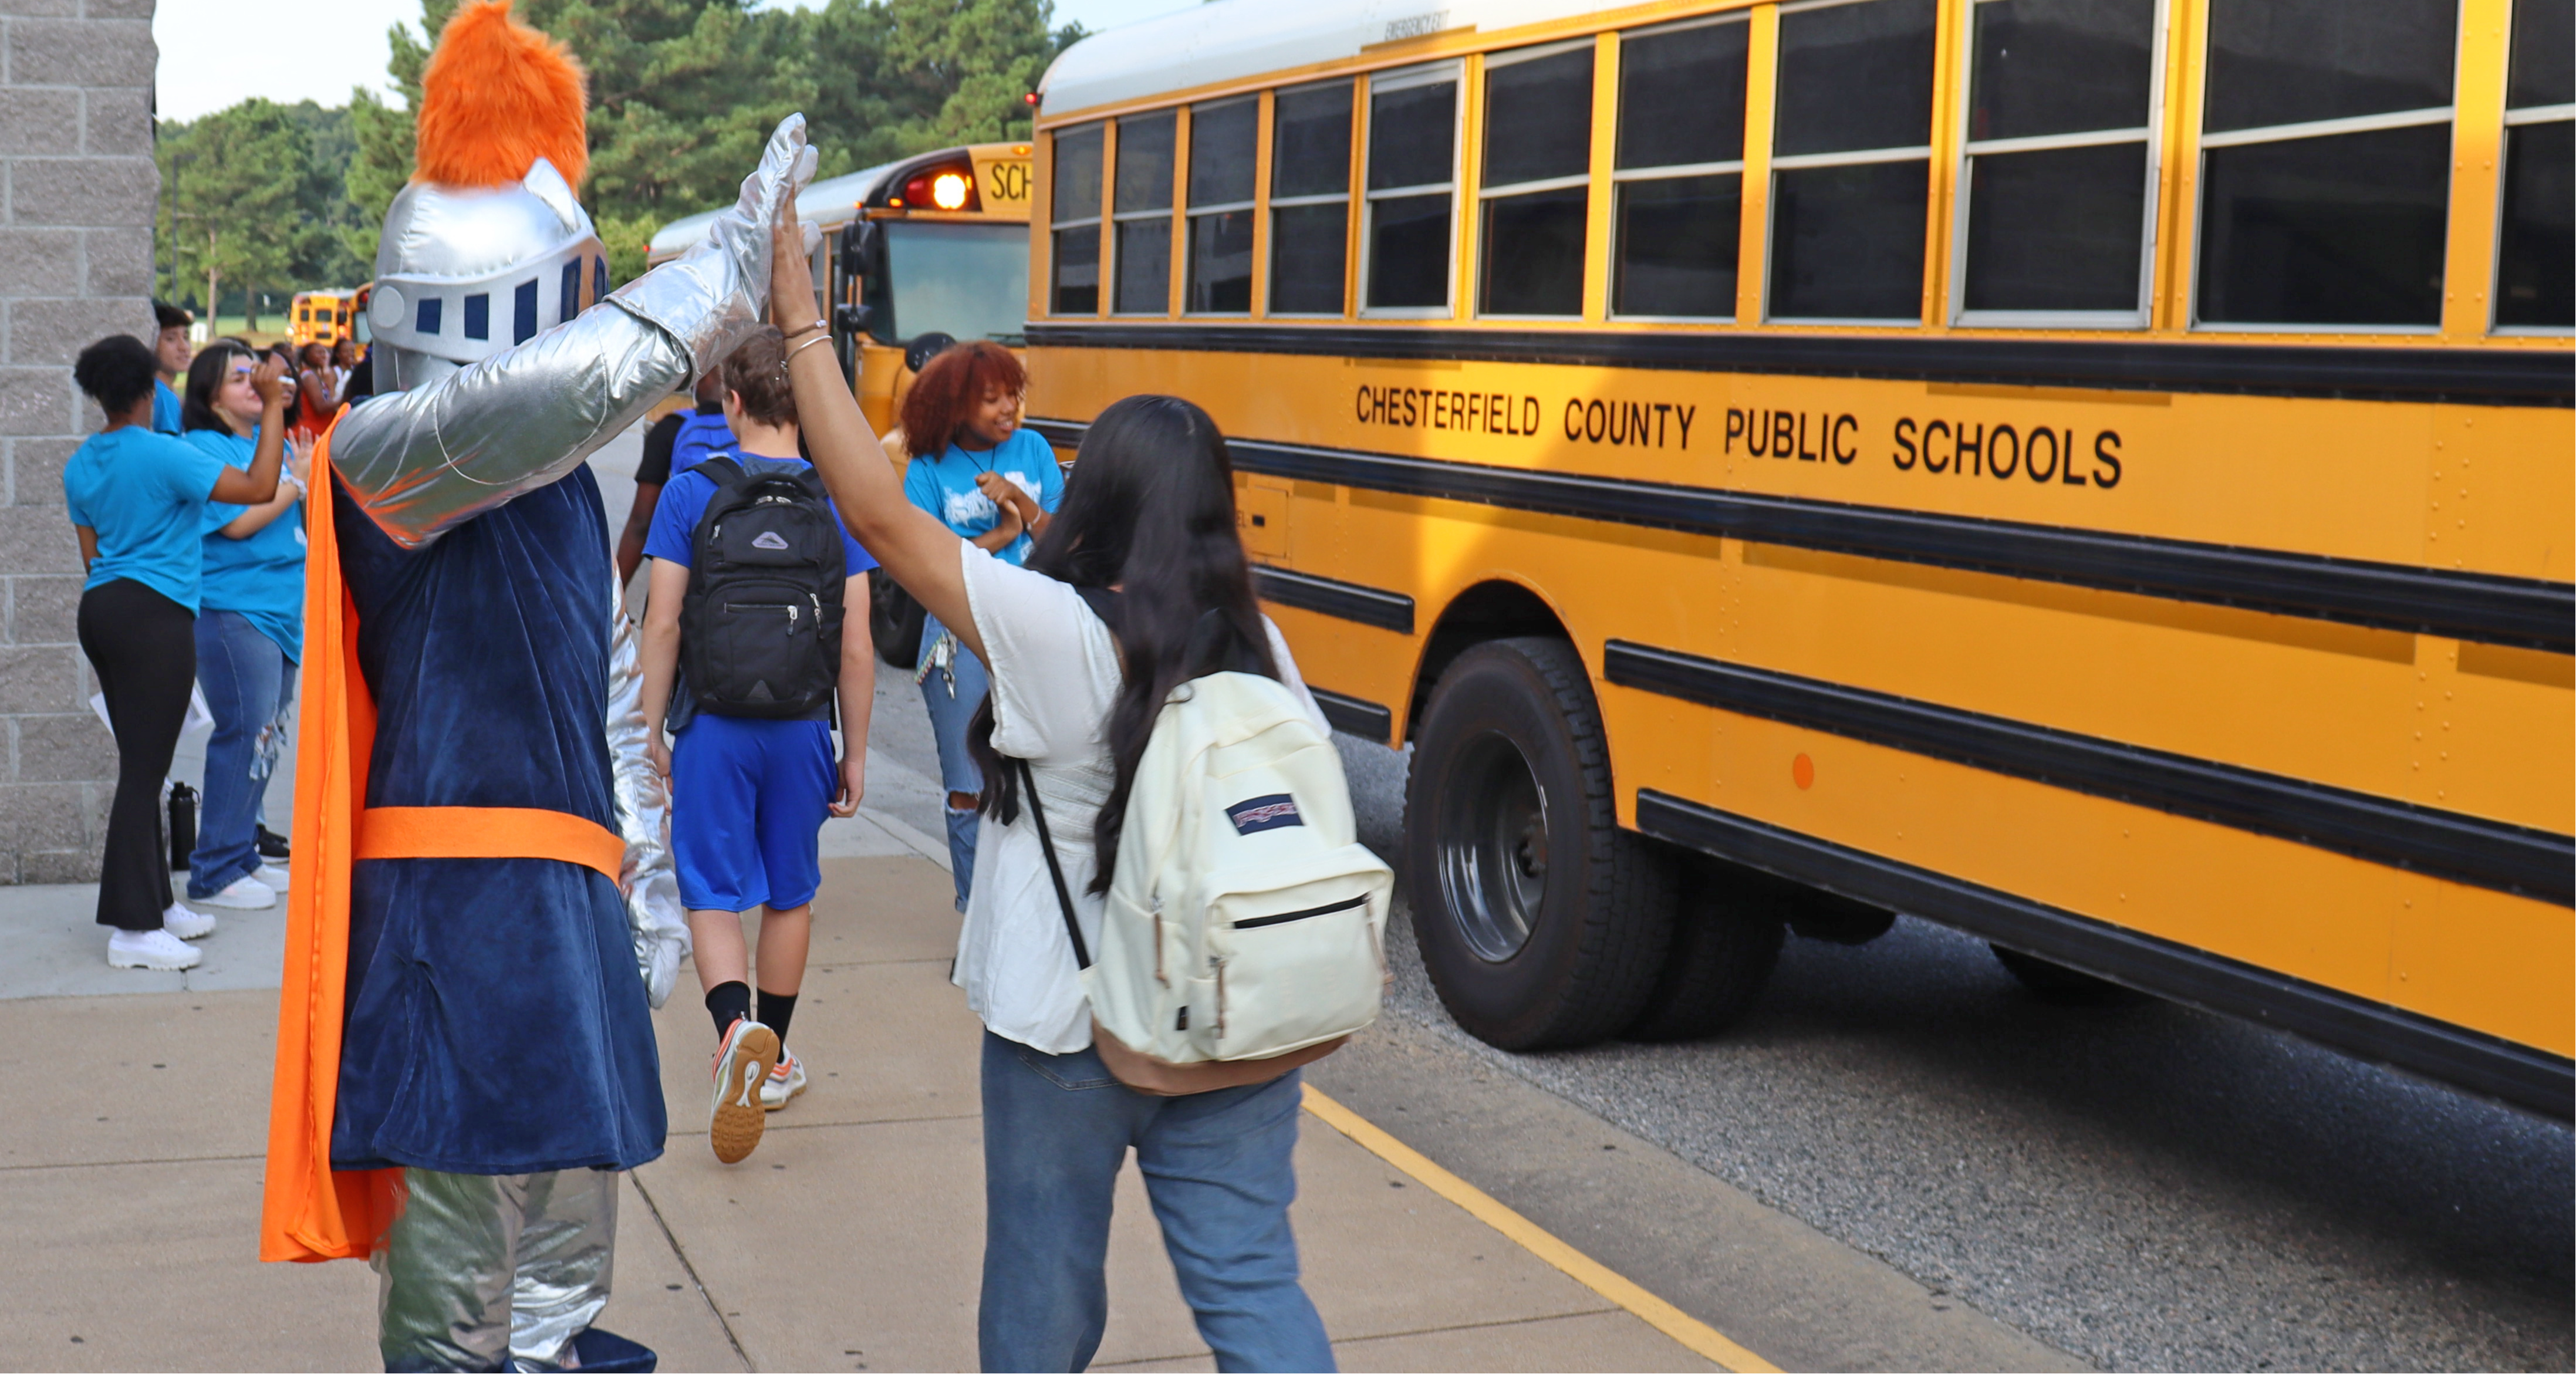 Lancer mascot high-fiving students as they get off the school bus